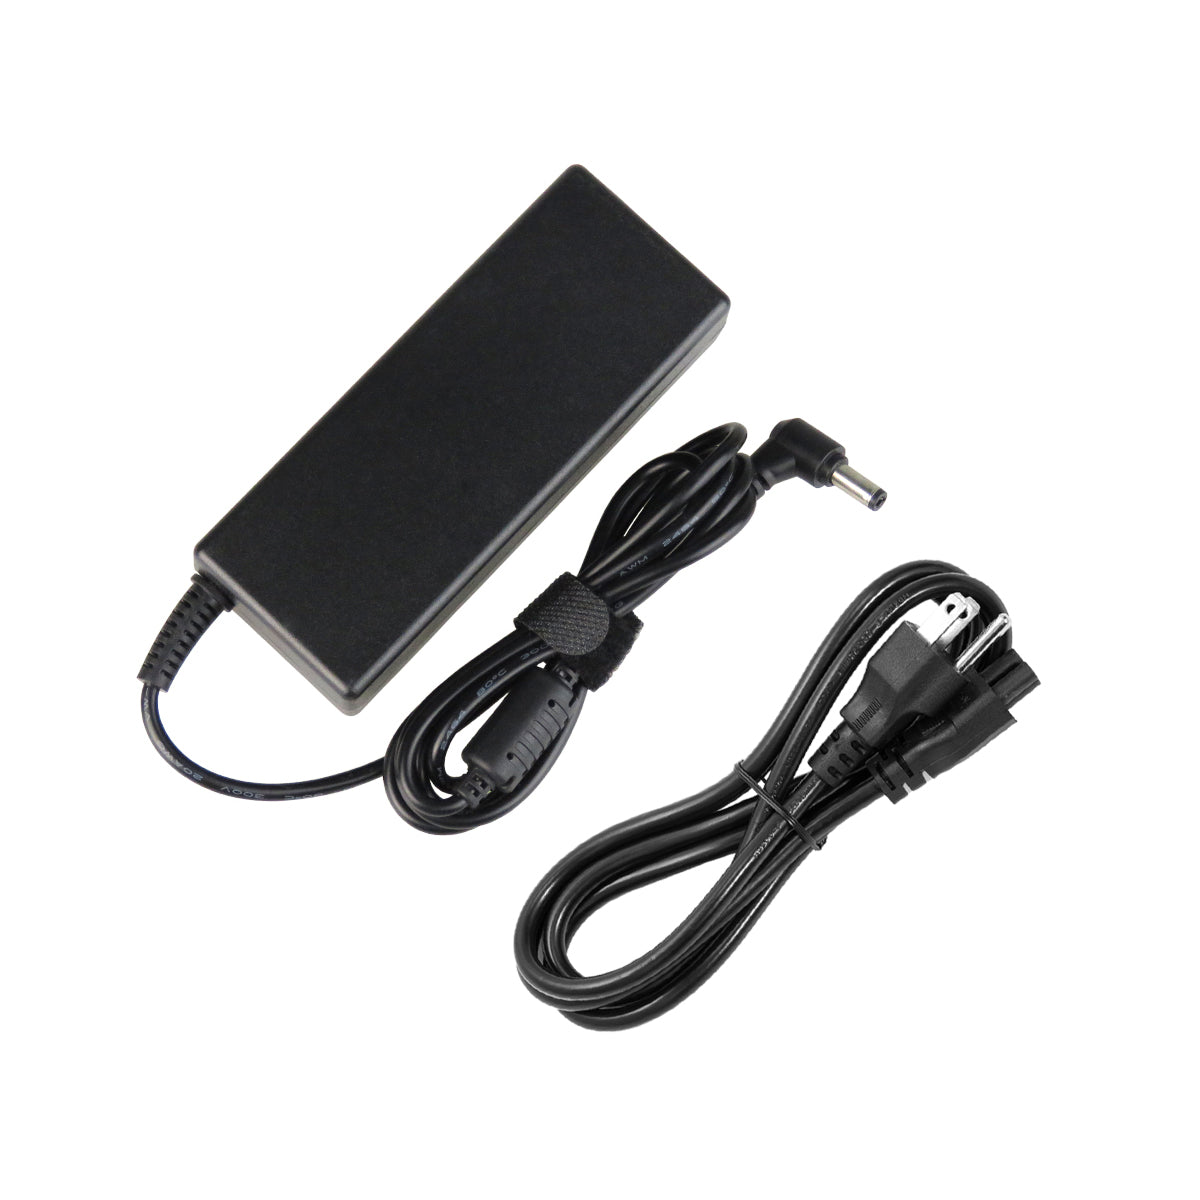 AC Adapter Charger for ASUS X57S Notebook.